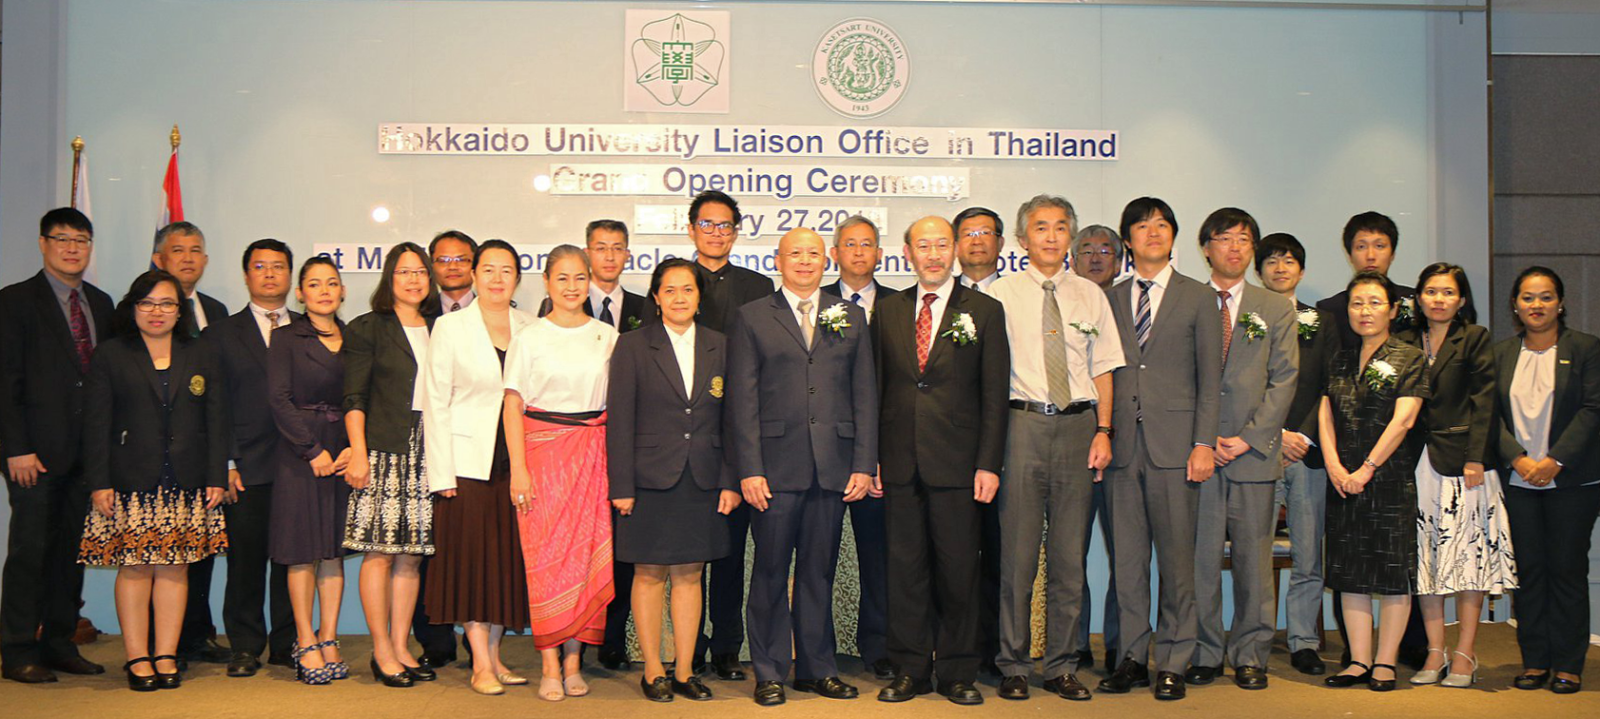 Thailand Liaison Office opening ceremony